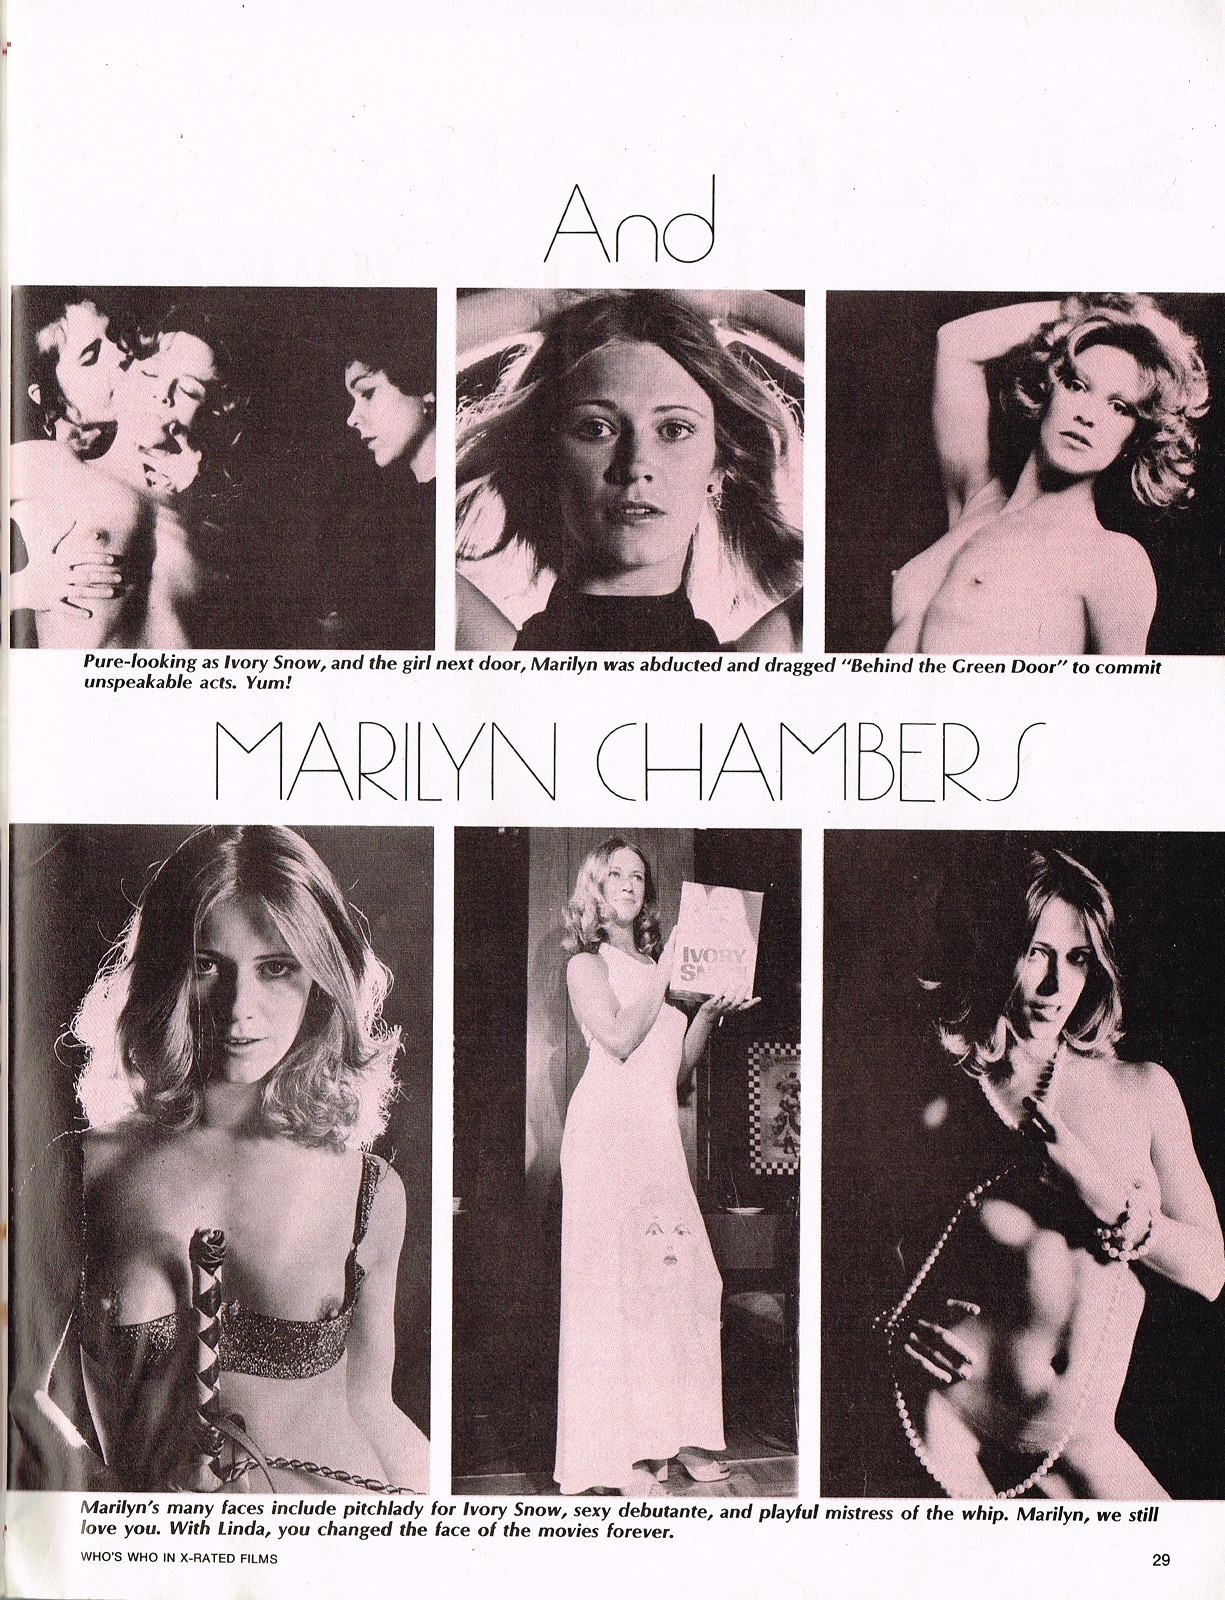 Who&rsquo;s Who in X-Rated Cinema, 1977 Visit Private Chambers: The Marilyn Chambers